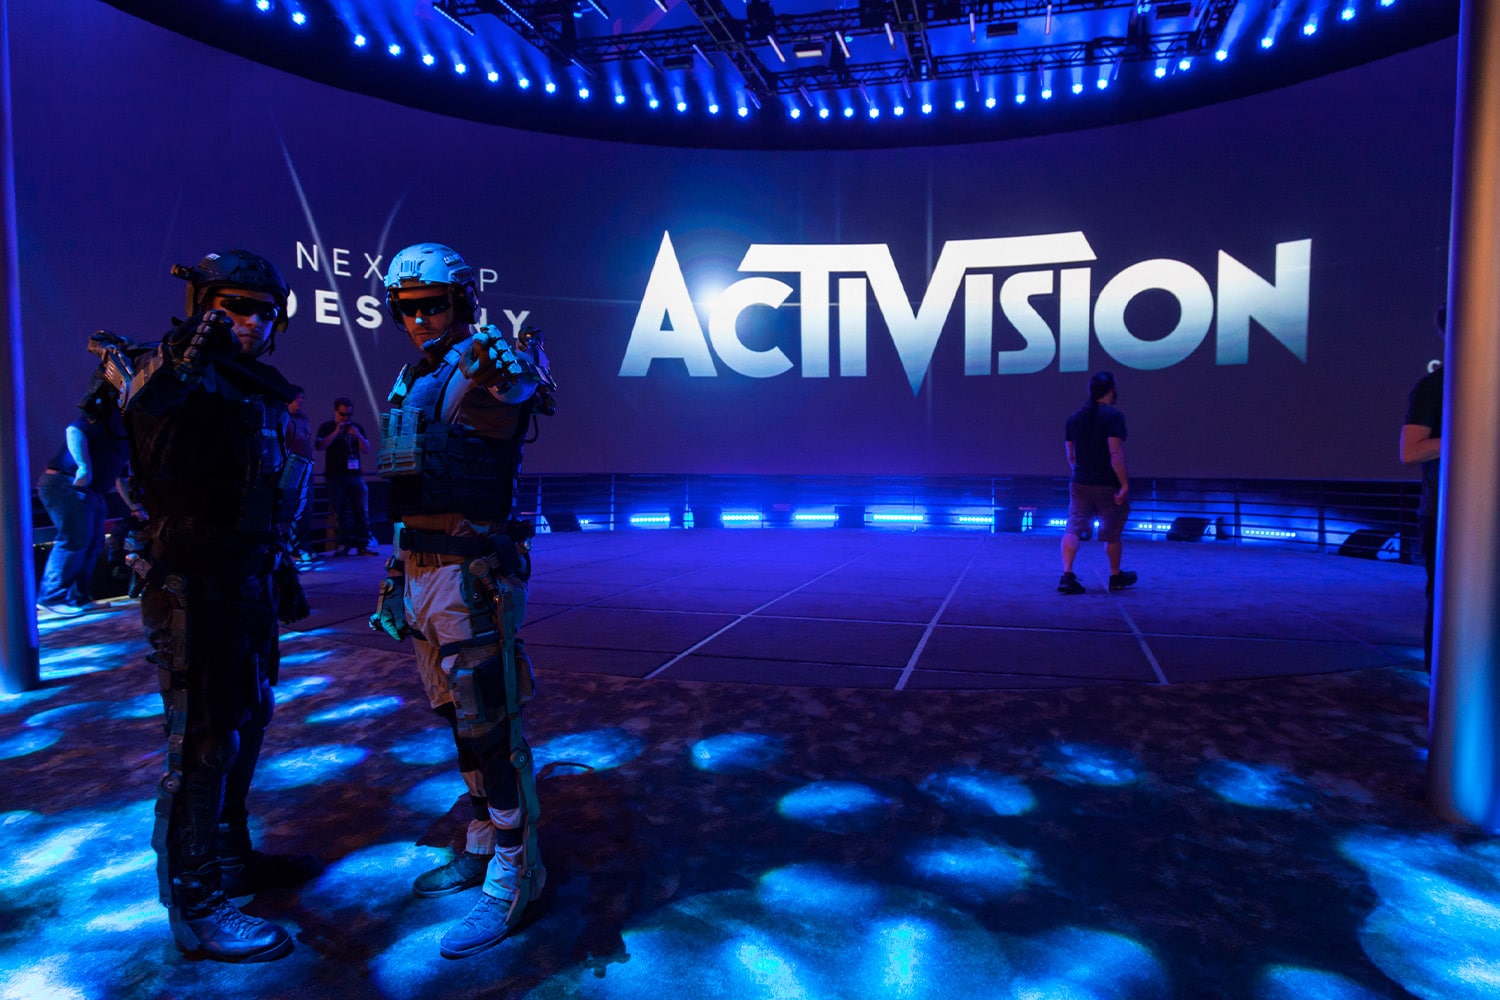 Microsoft's $69B Acquisition of Activision Blizzard Blocked in U.K.